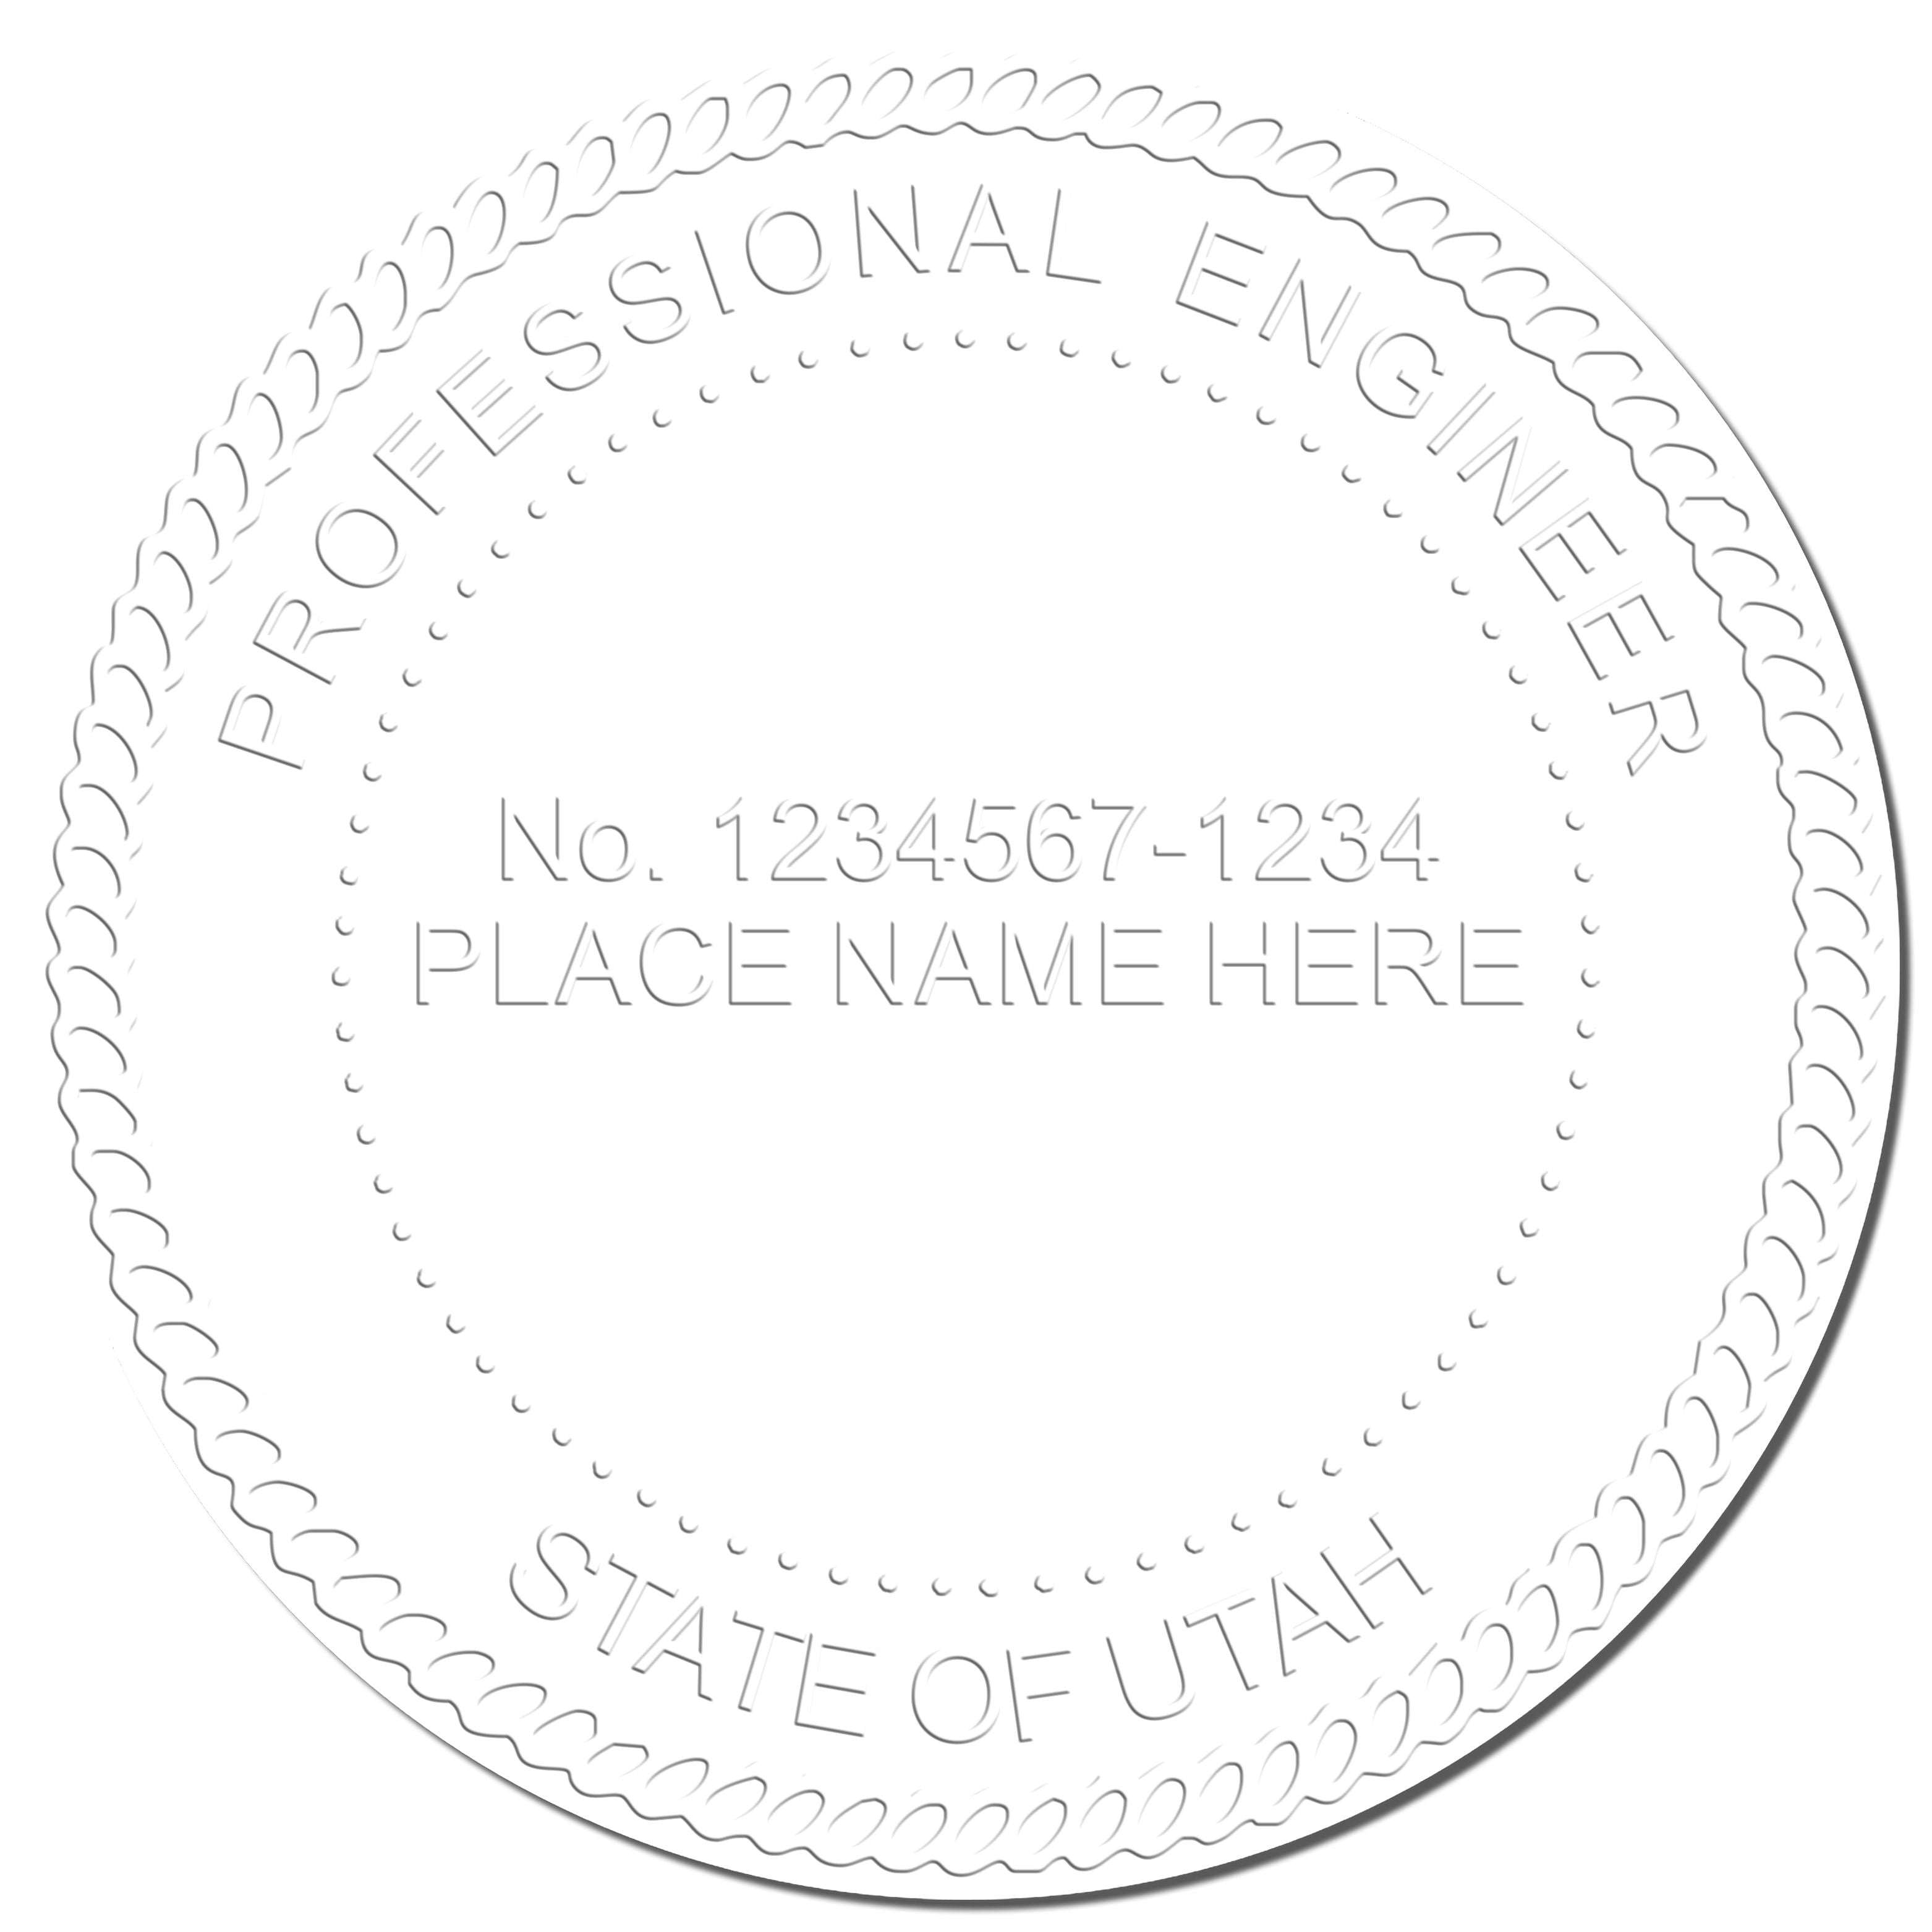 This paper is stamped with a sample imprint of the Heavy Duty Cast Iron Utah Engineer Seal Embosser, signifying its quality and reliability.